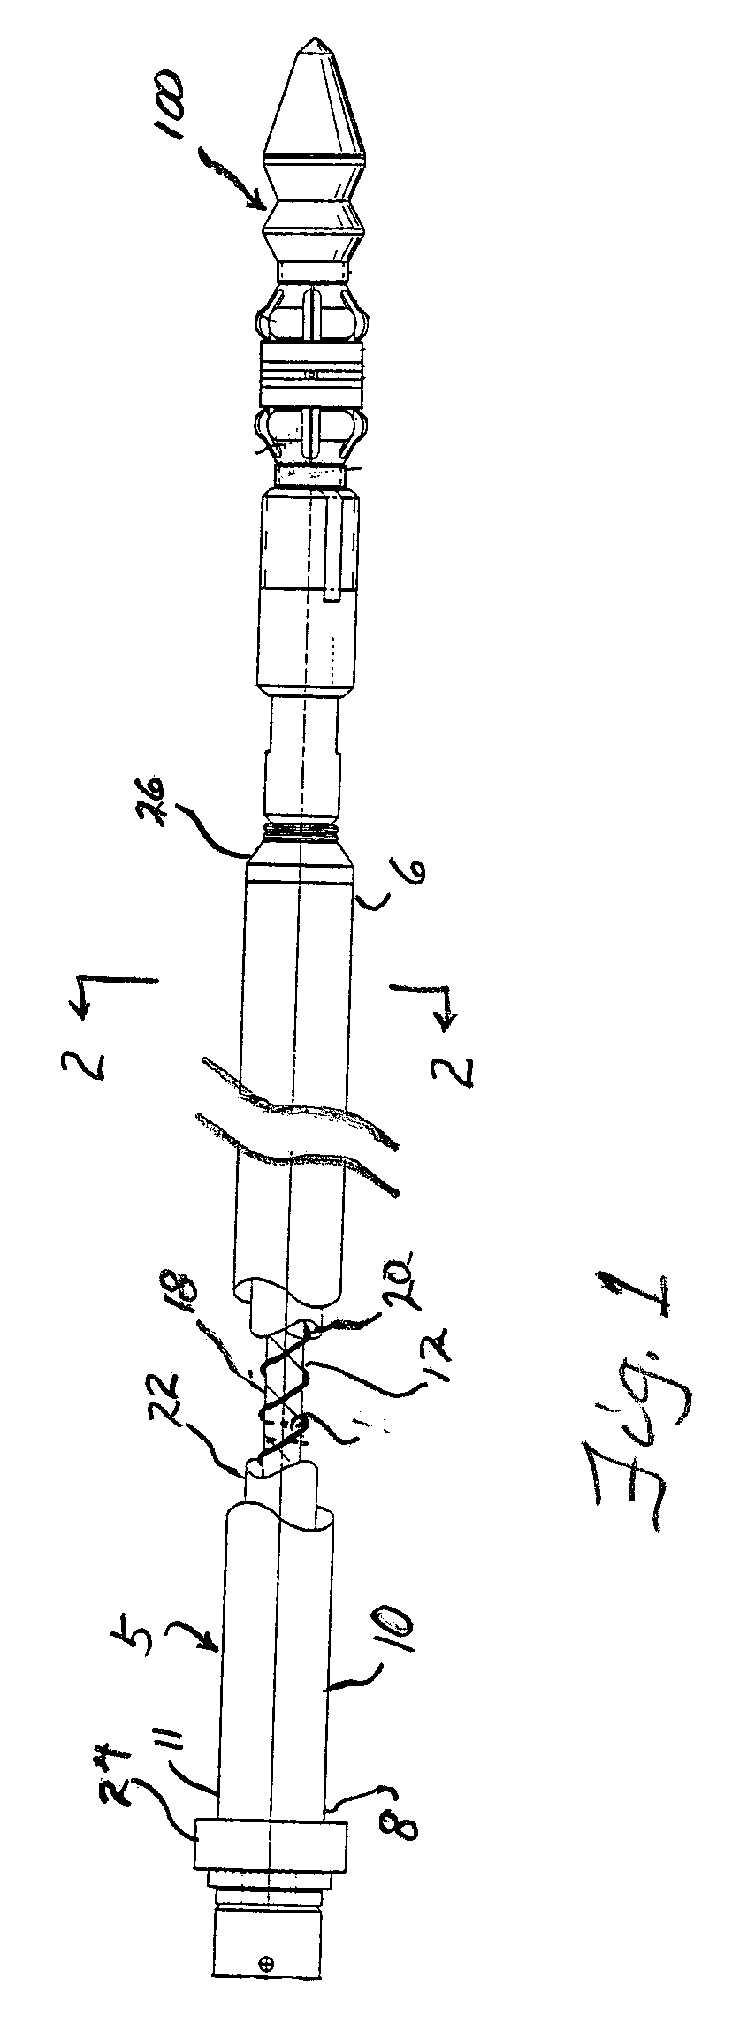 Flexible shaft with a helically wound data cable supporting a smooth outer sleeve for eddy current probe